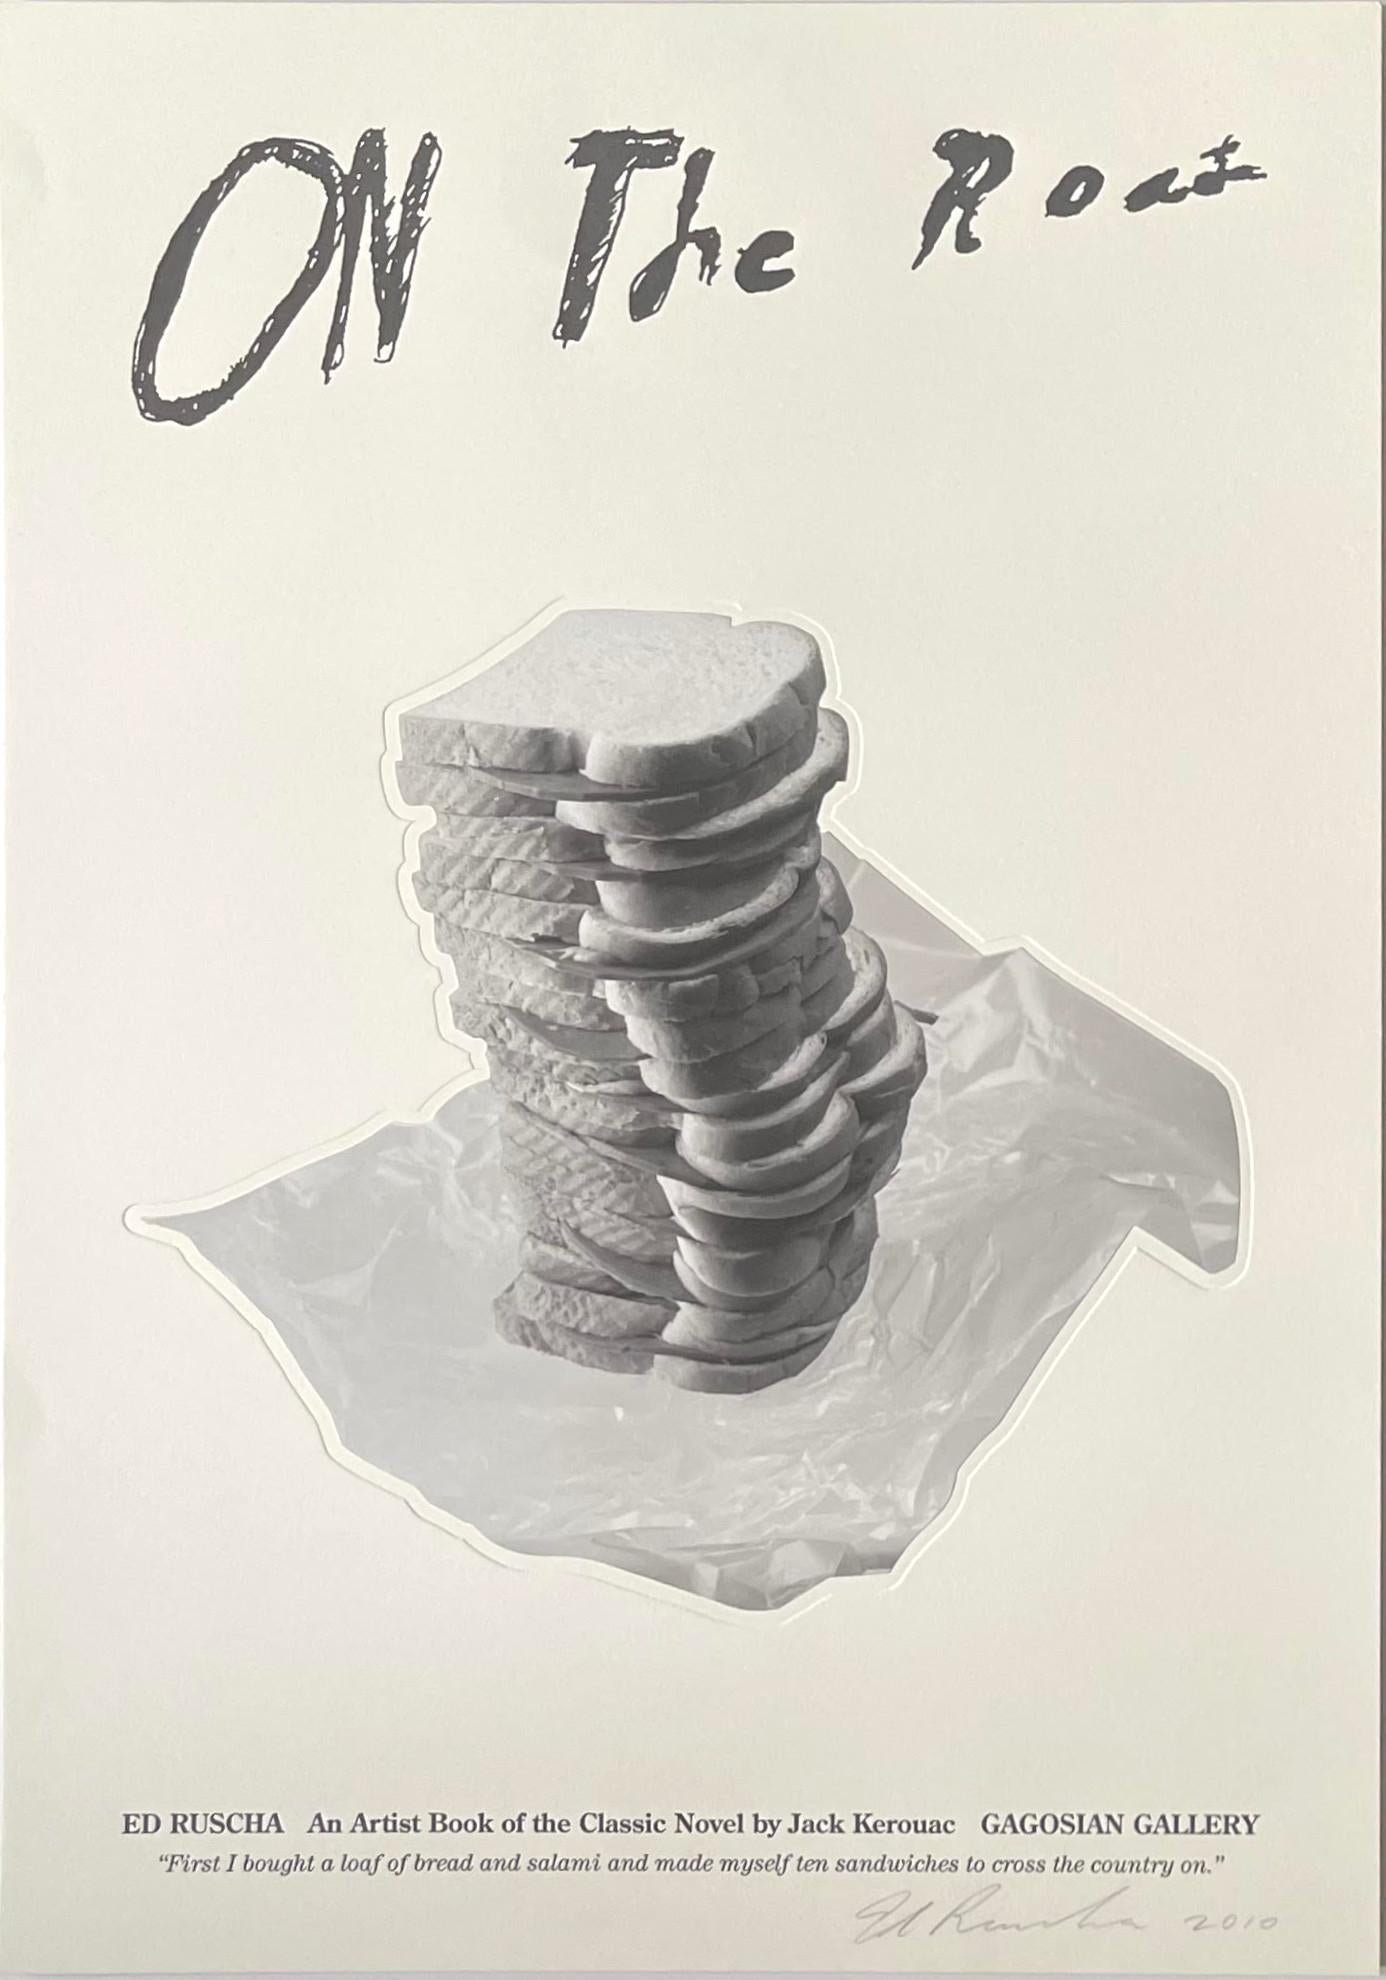 Kerouac's On the Road (10 sandwiches with bread and salami), SIGNED by Ed Ruscha For Sale 1